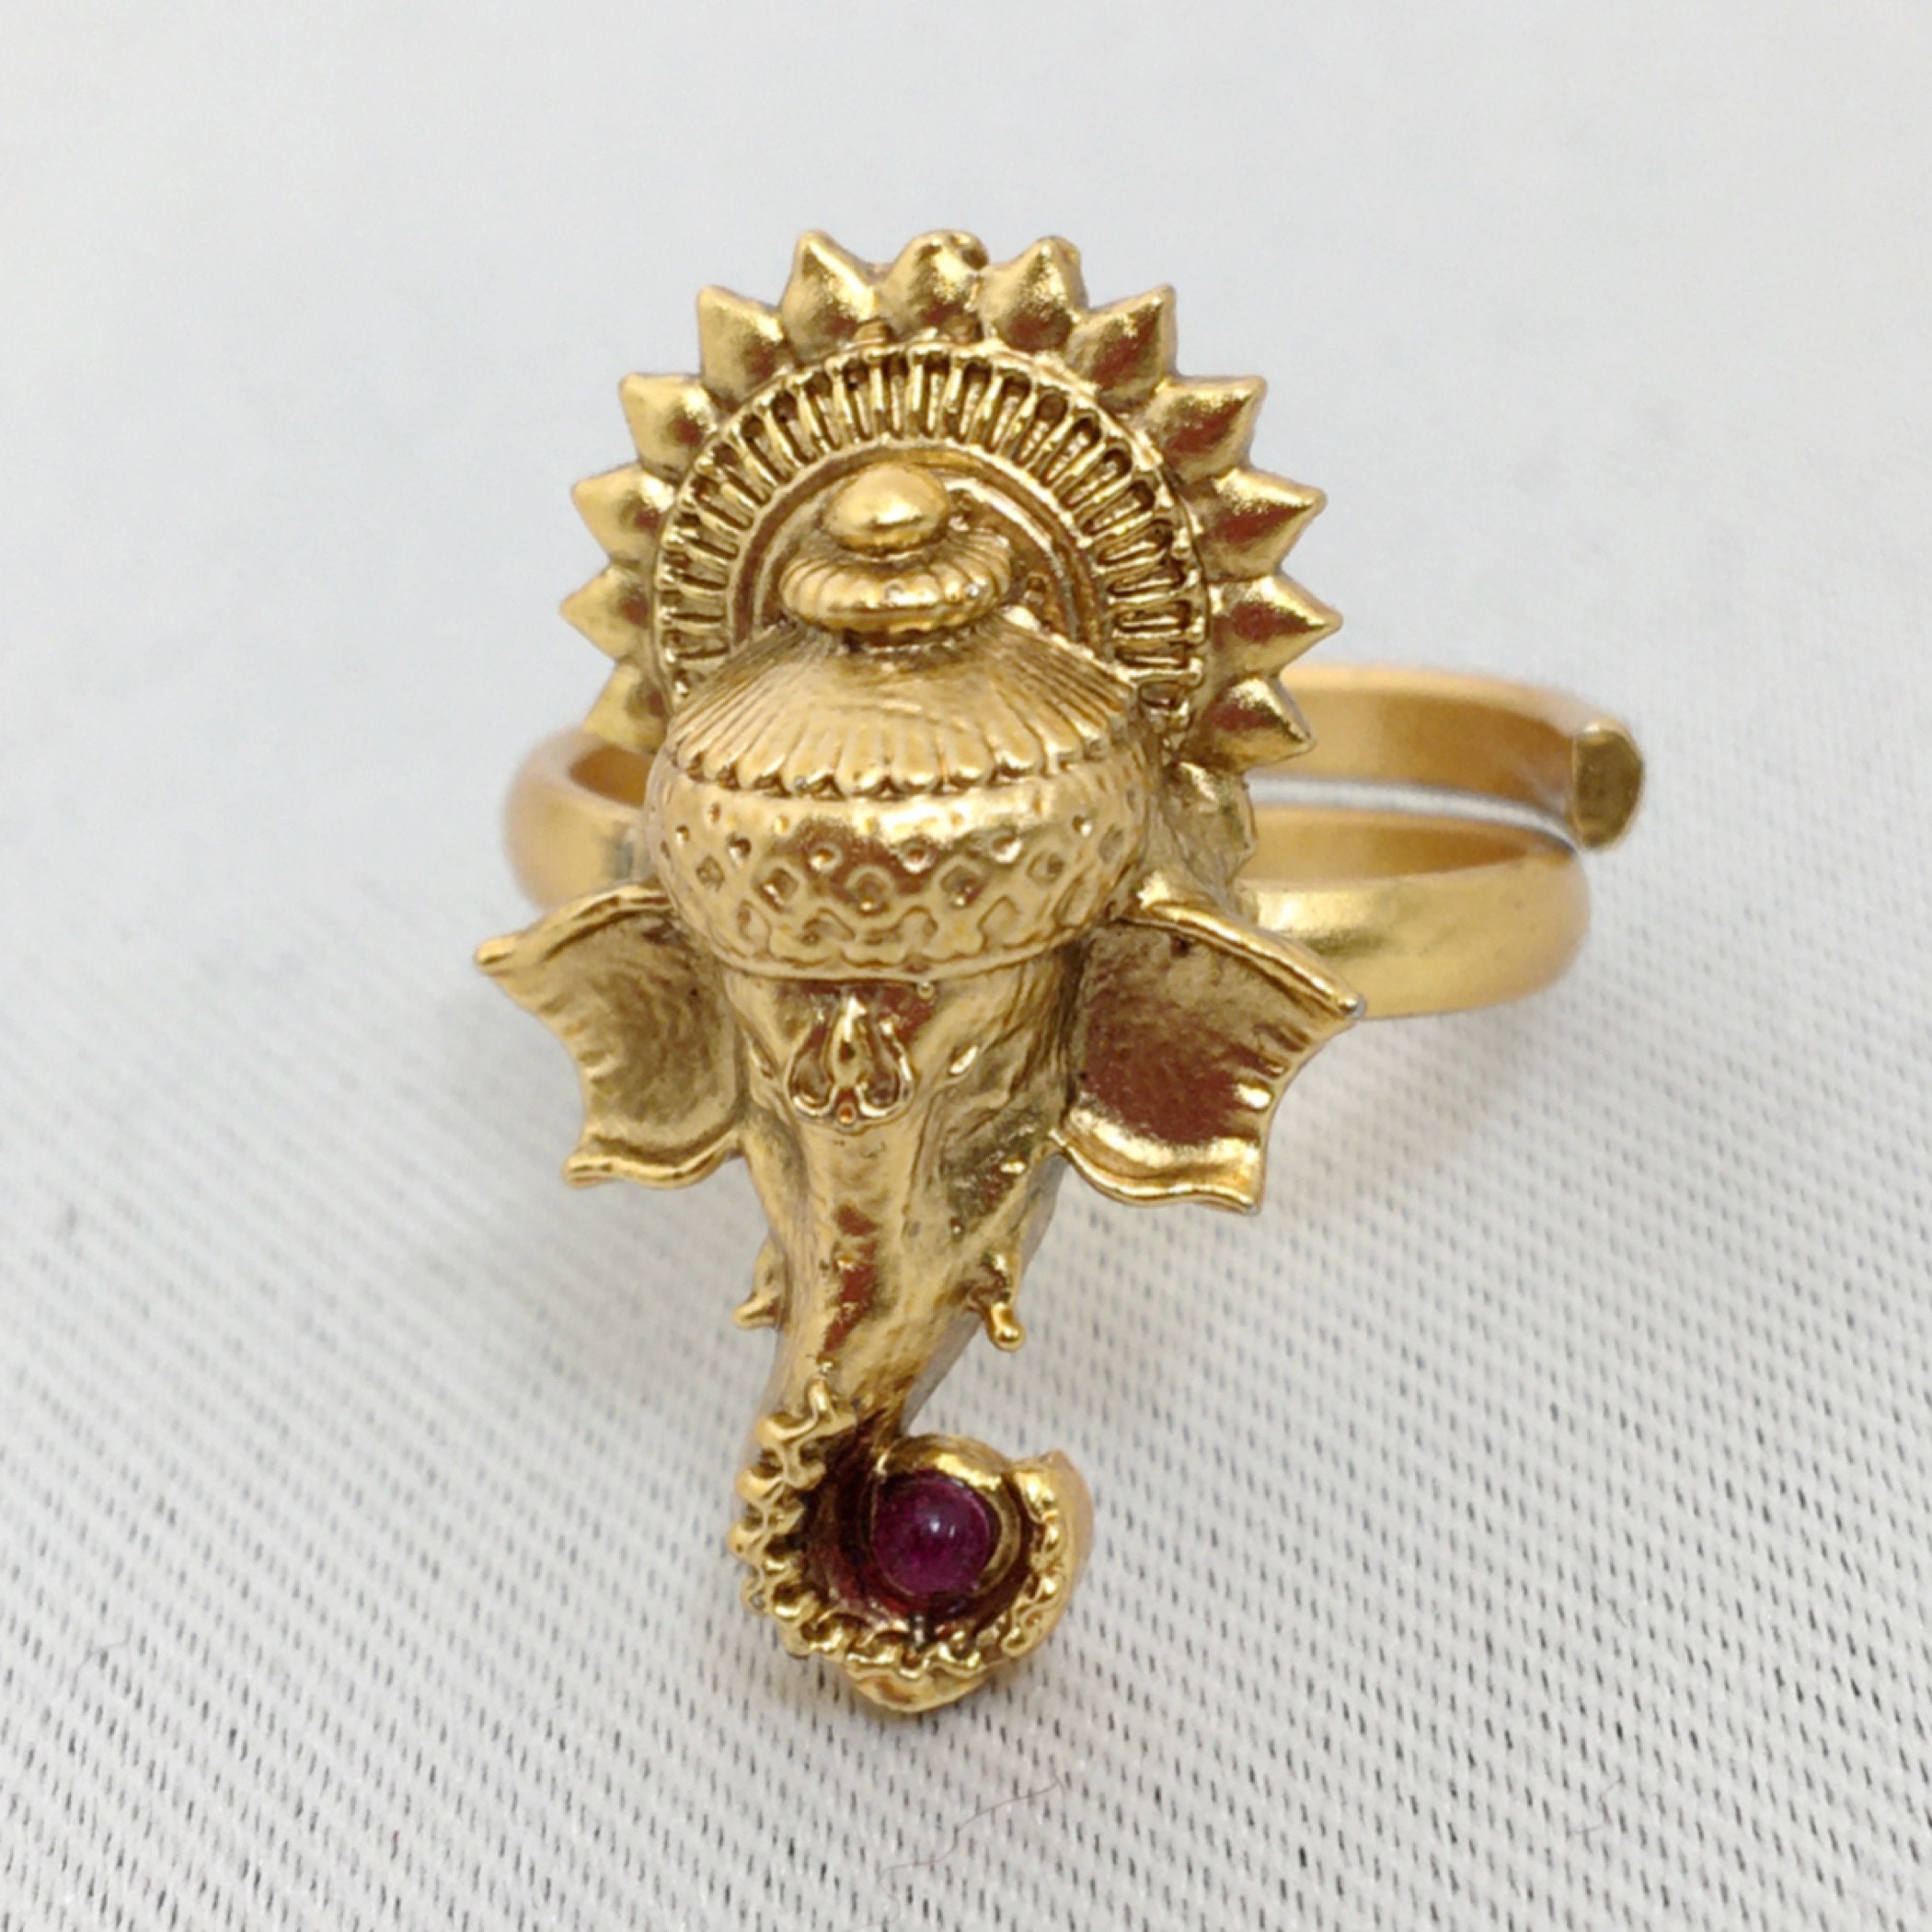 Buy Ganesh Gold Ring Online In India - Etsy India